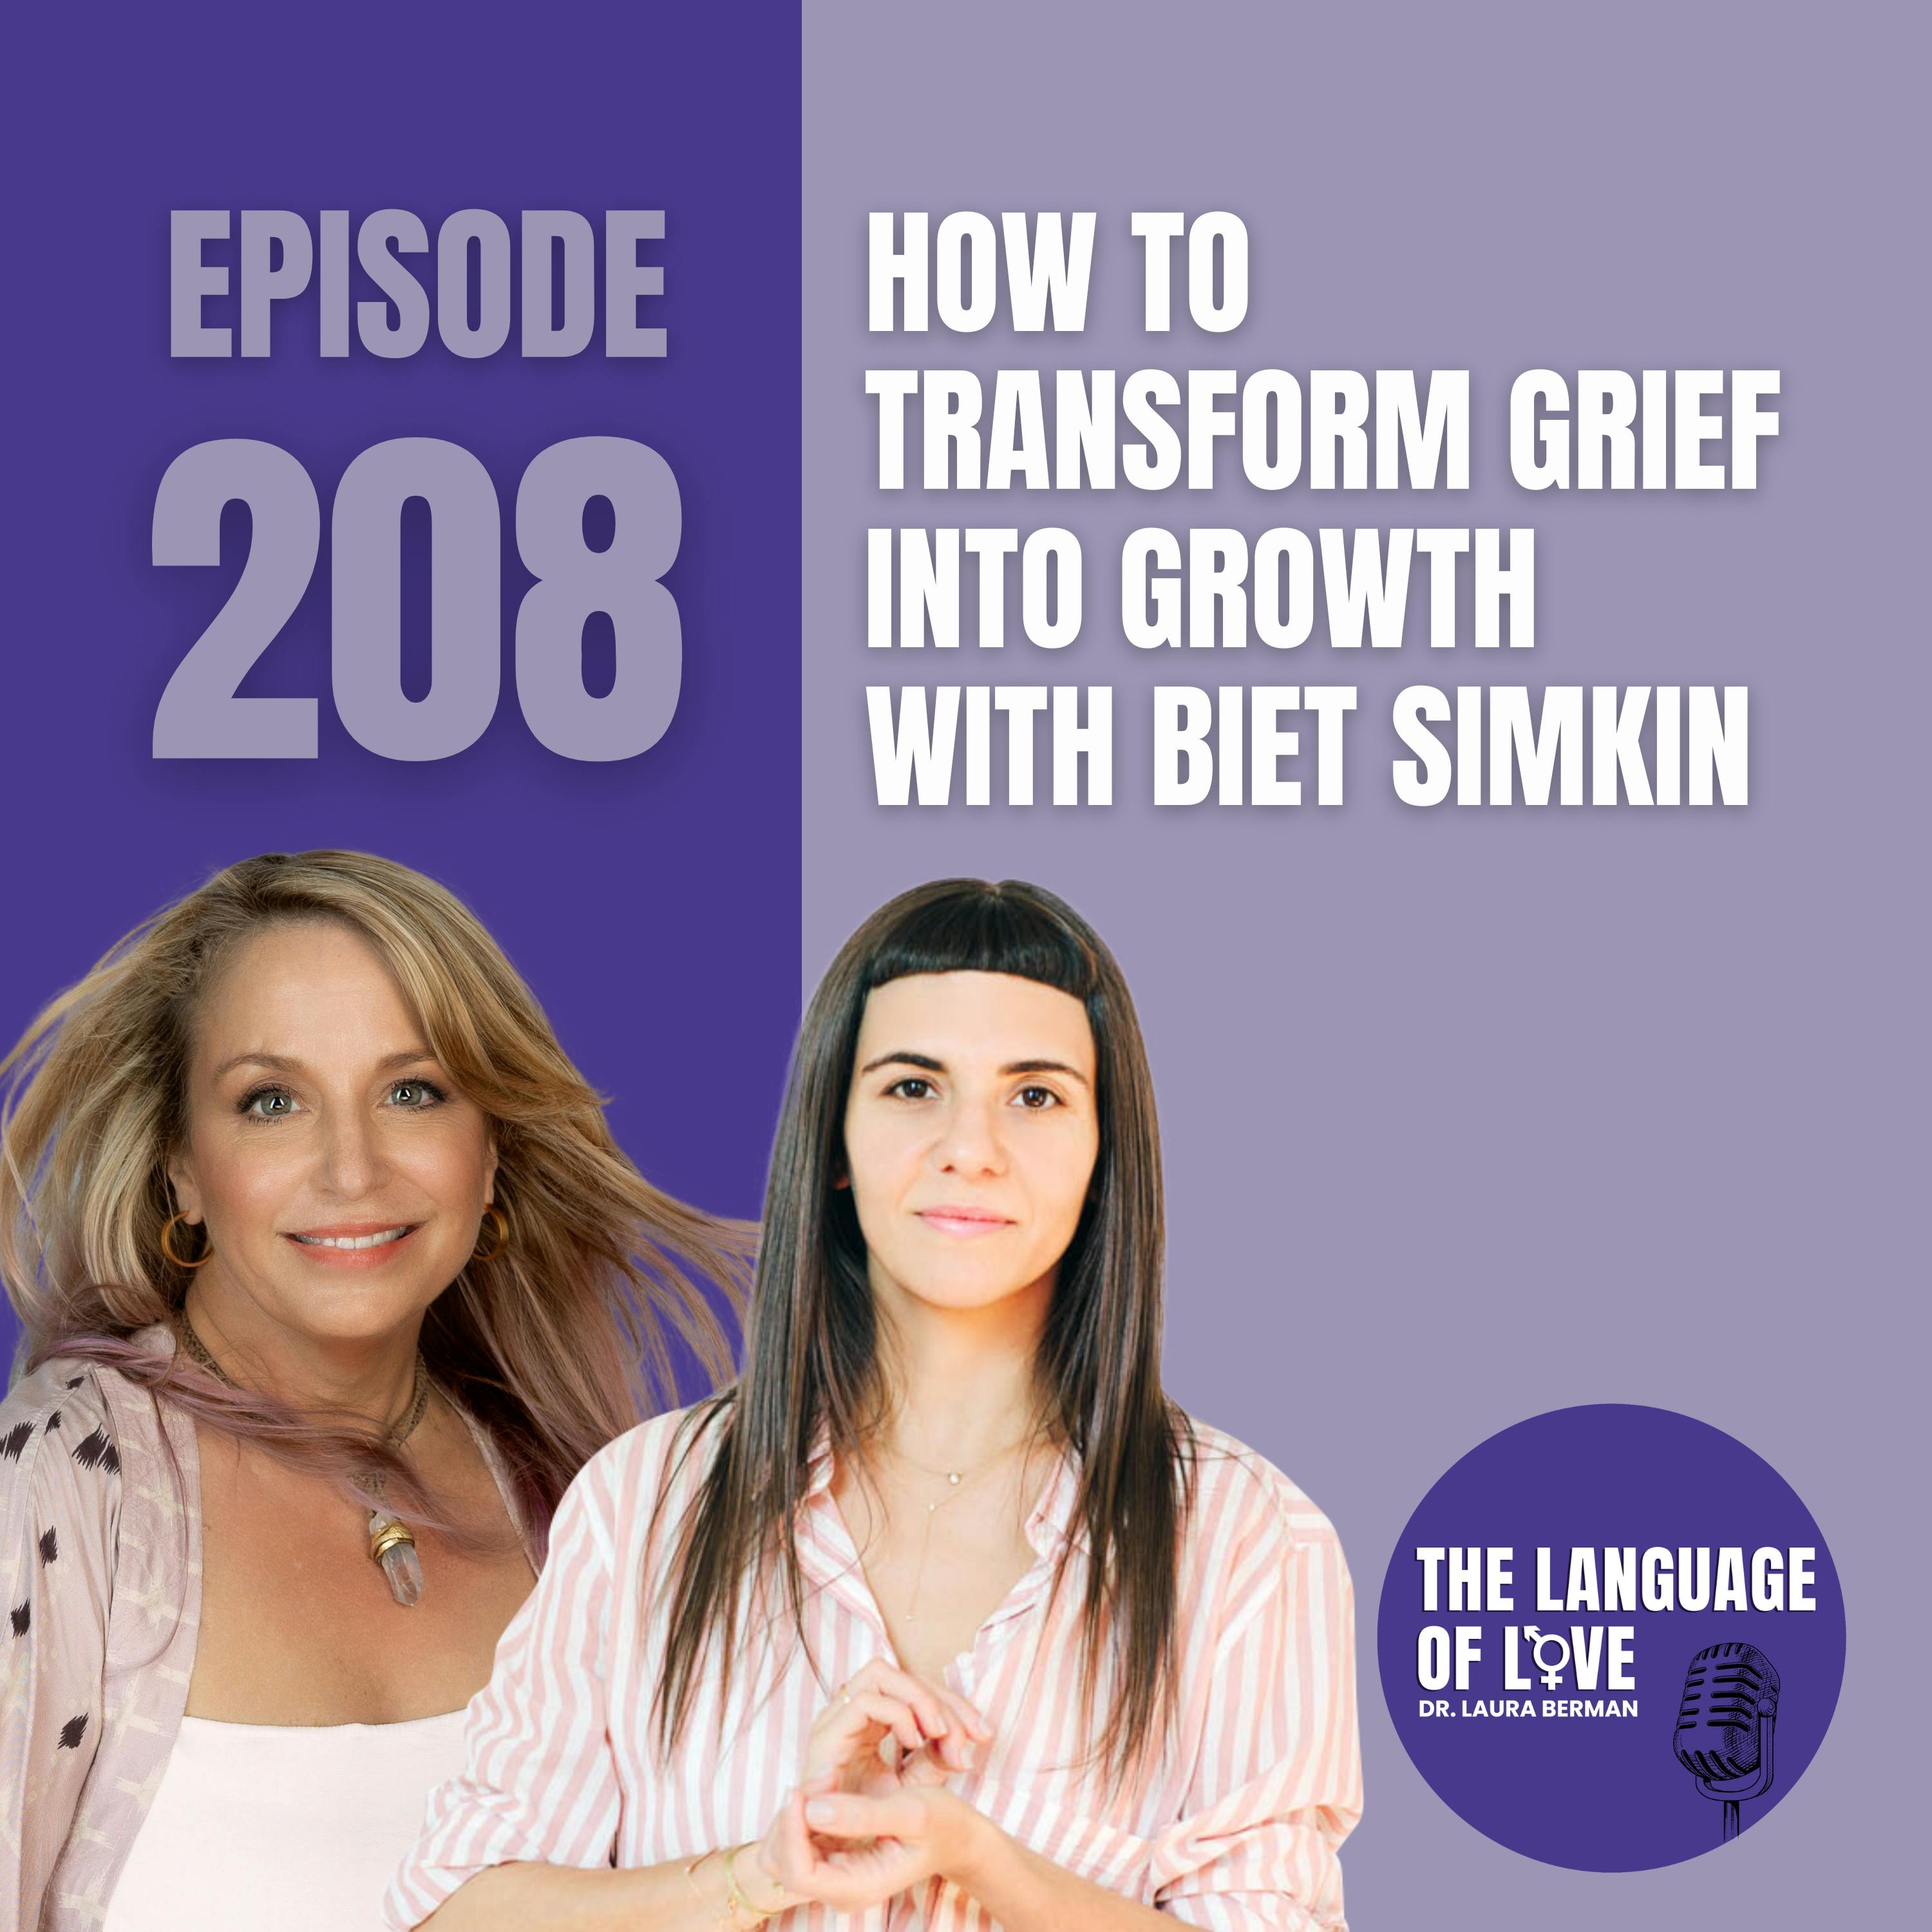 How to Transform Grief into Growth with Biet Simkin